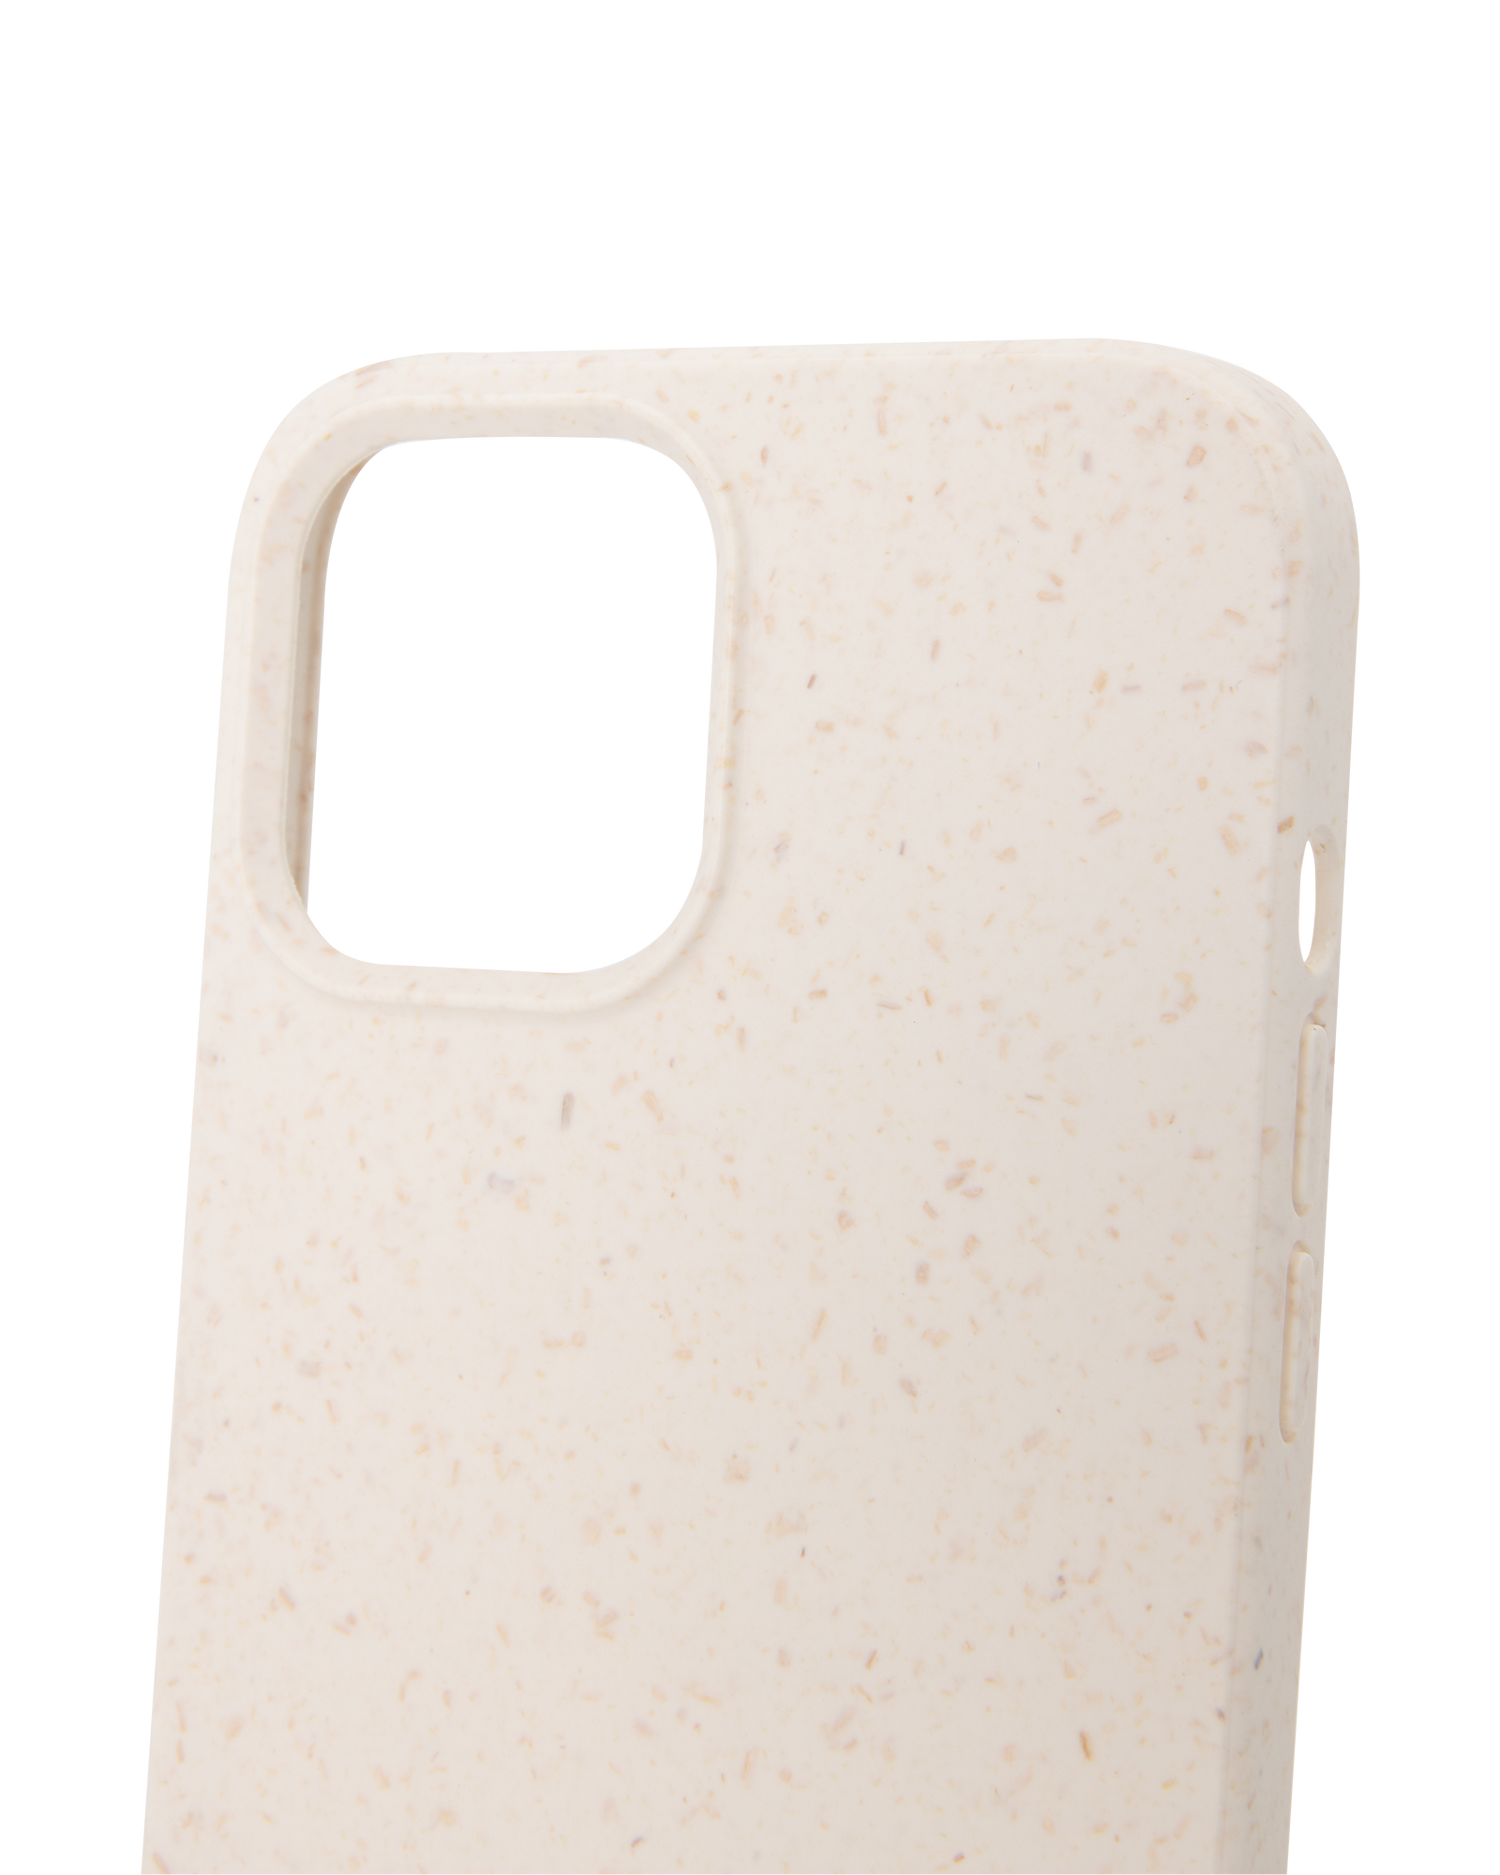 White Eco-Friendly Phone Case for Apple iPhone 12 Pro Max: Details outside